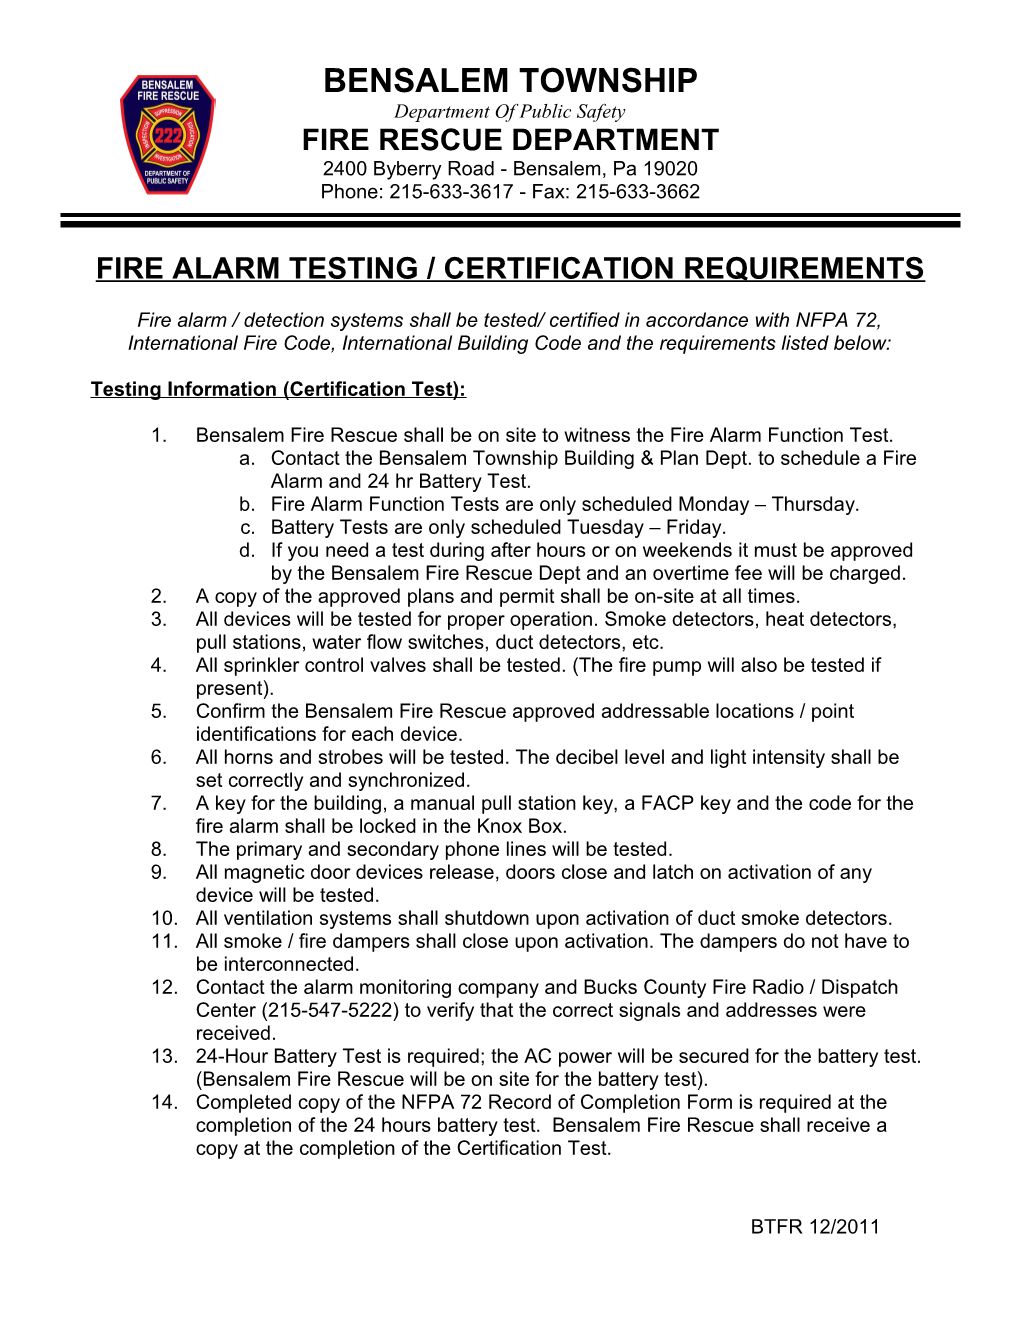 Fire Alarm Testing / Certification Requirements